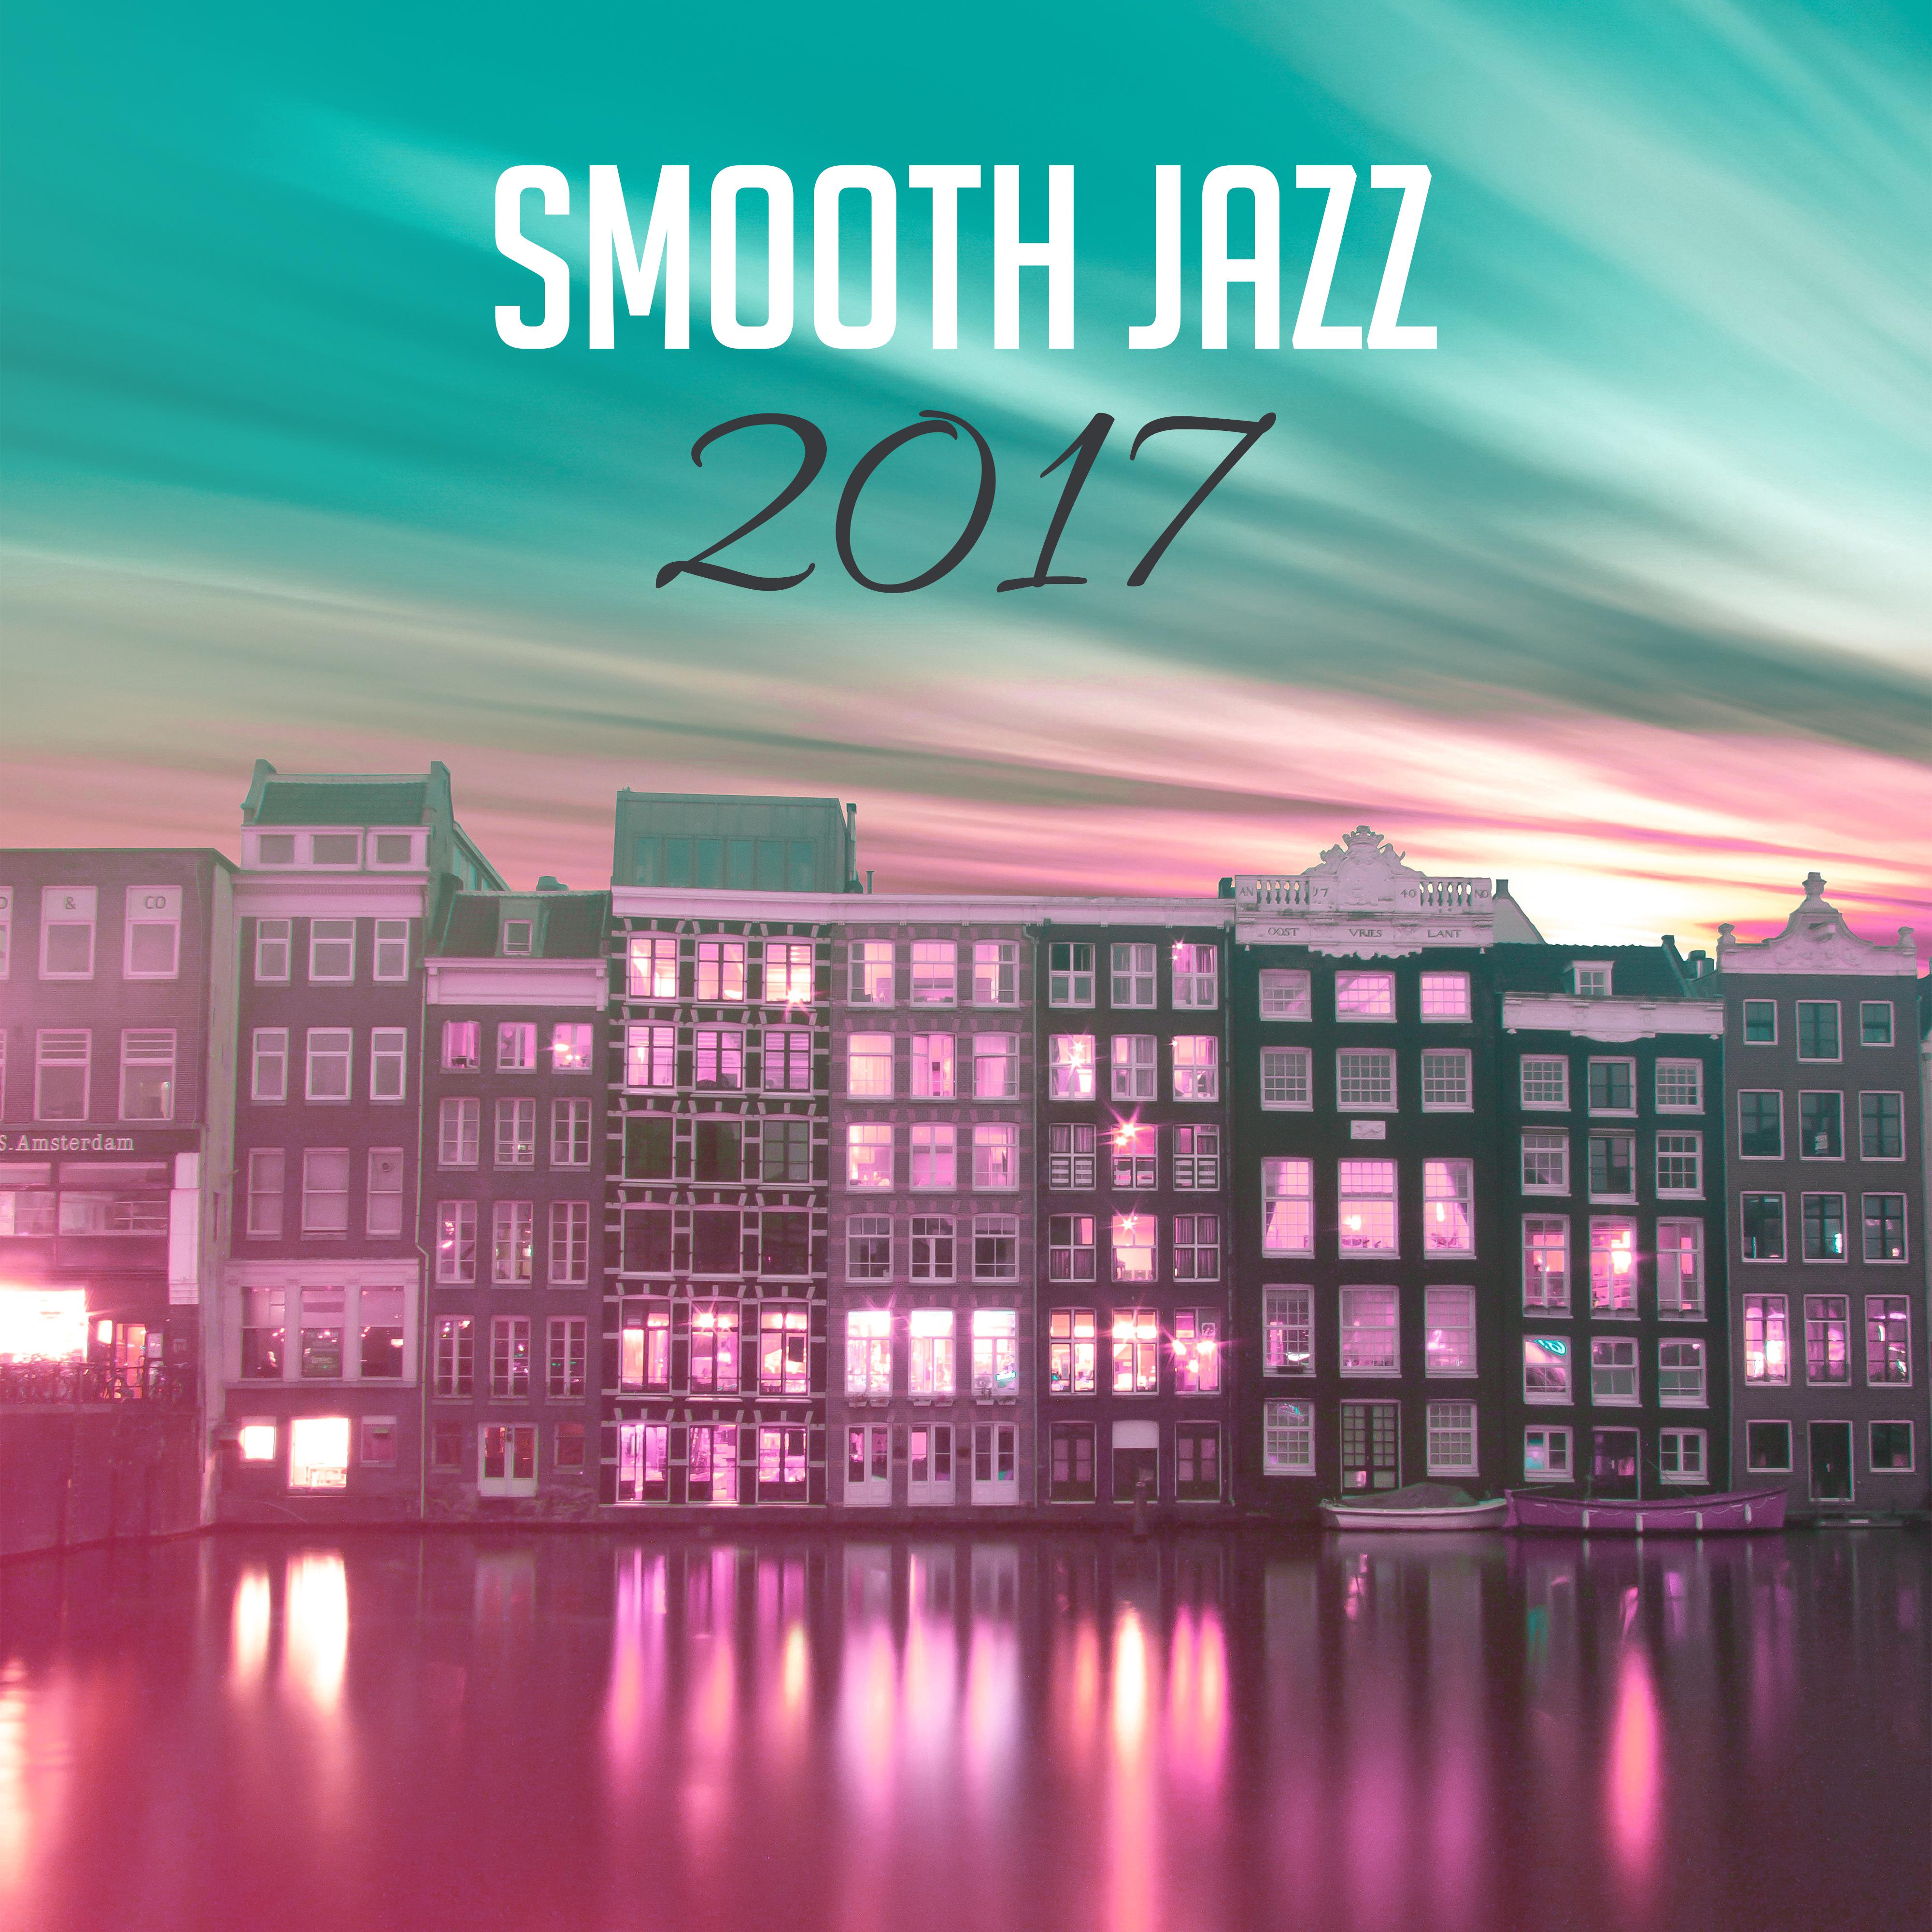 Smooth Jazz 2017 – Relaxed Jazz, Instrumental Music, Ambient Lounge, New York Music Compilation